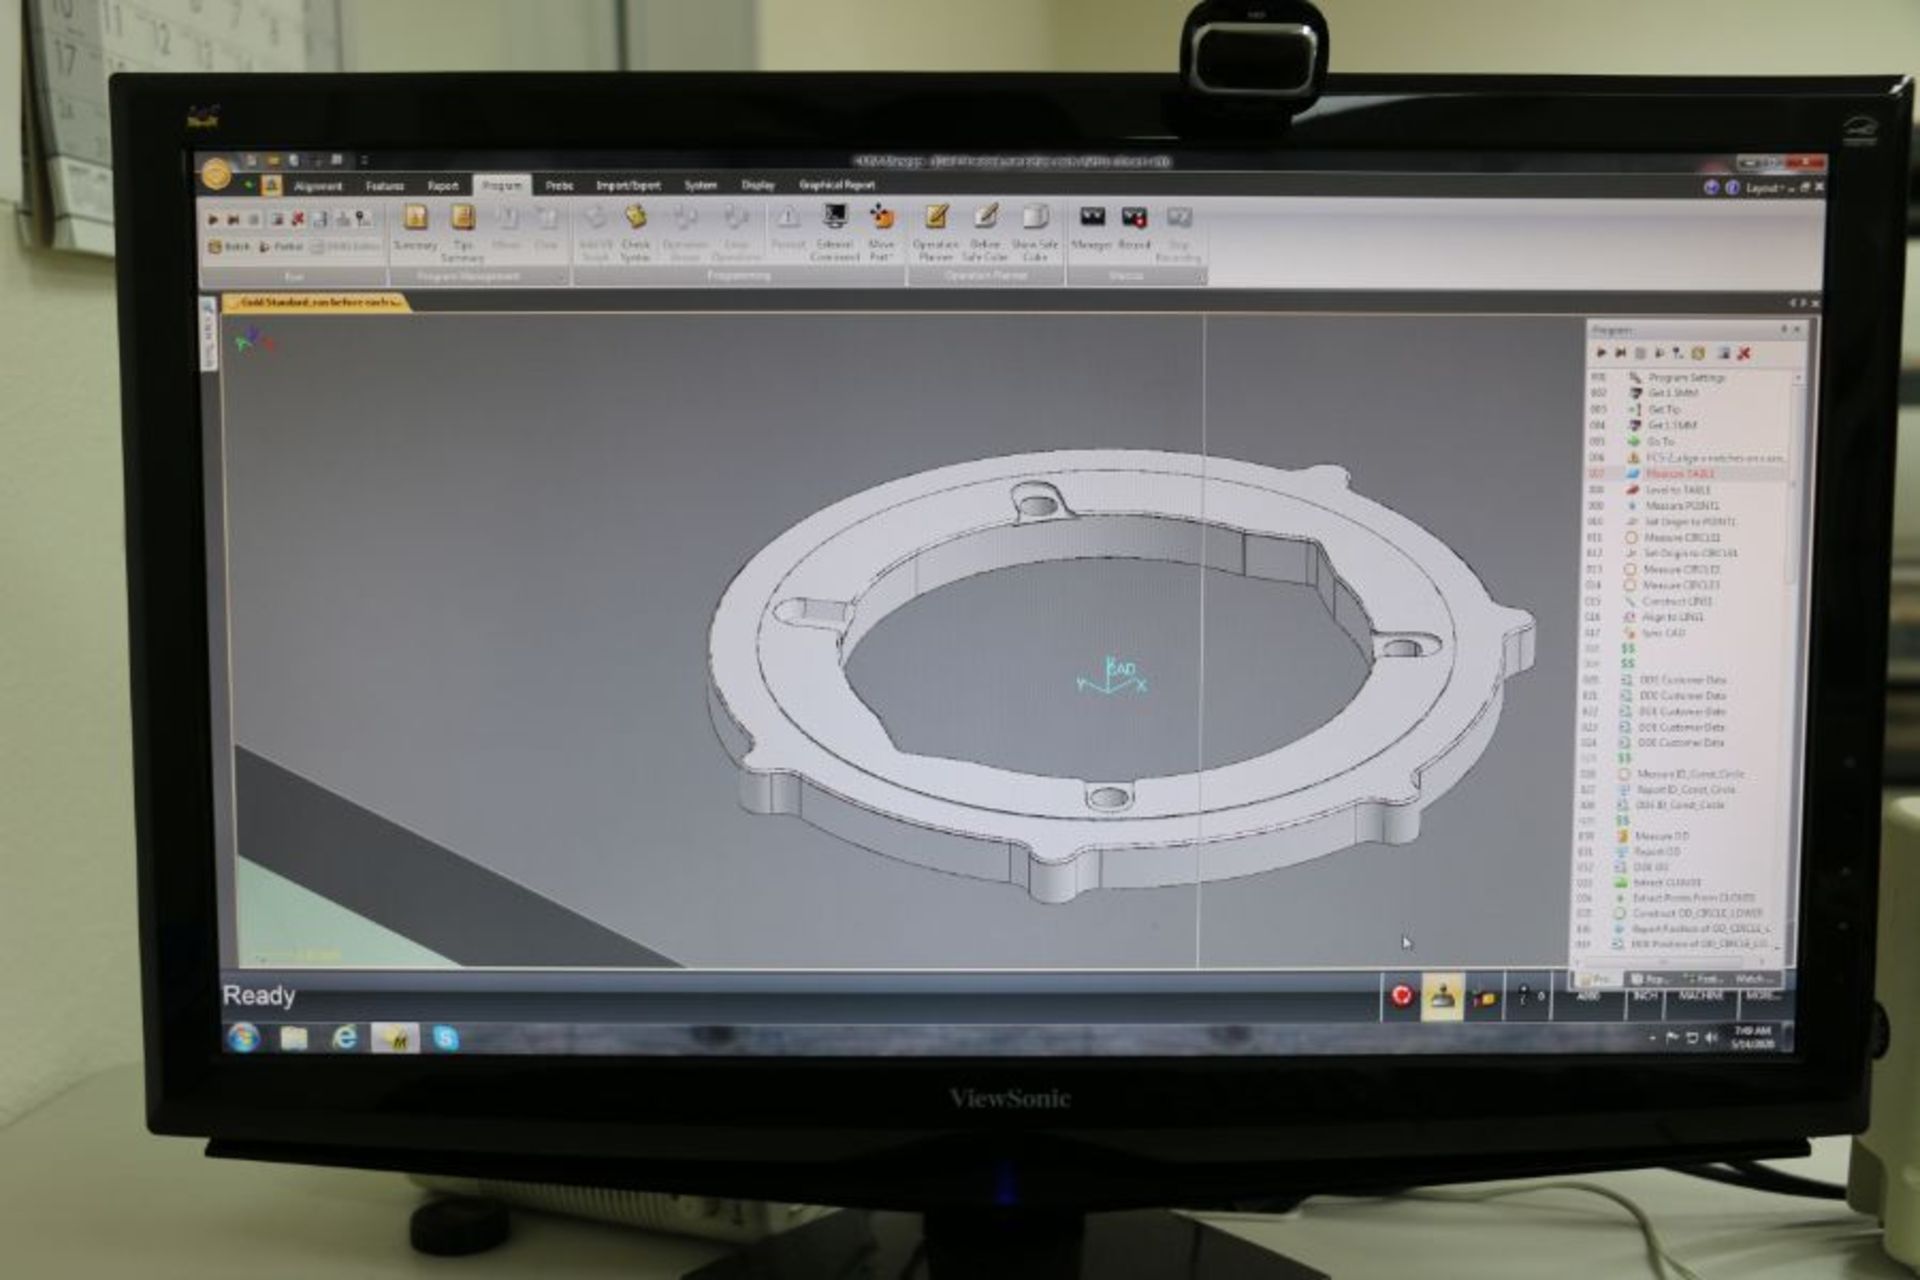 Mitutoyo BHN-710 DCC CMM, 28” x 40” x 24” Travels, PH10 Probe, s/n 93090334, CMM Manager Software, - Image 8 of 19